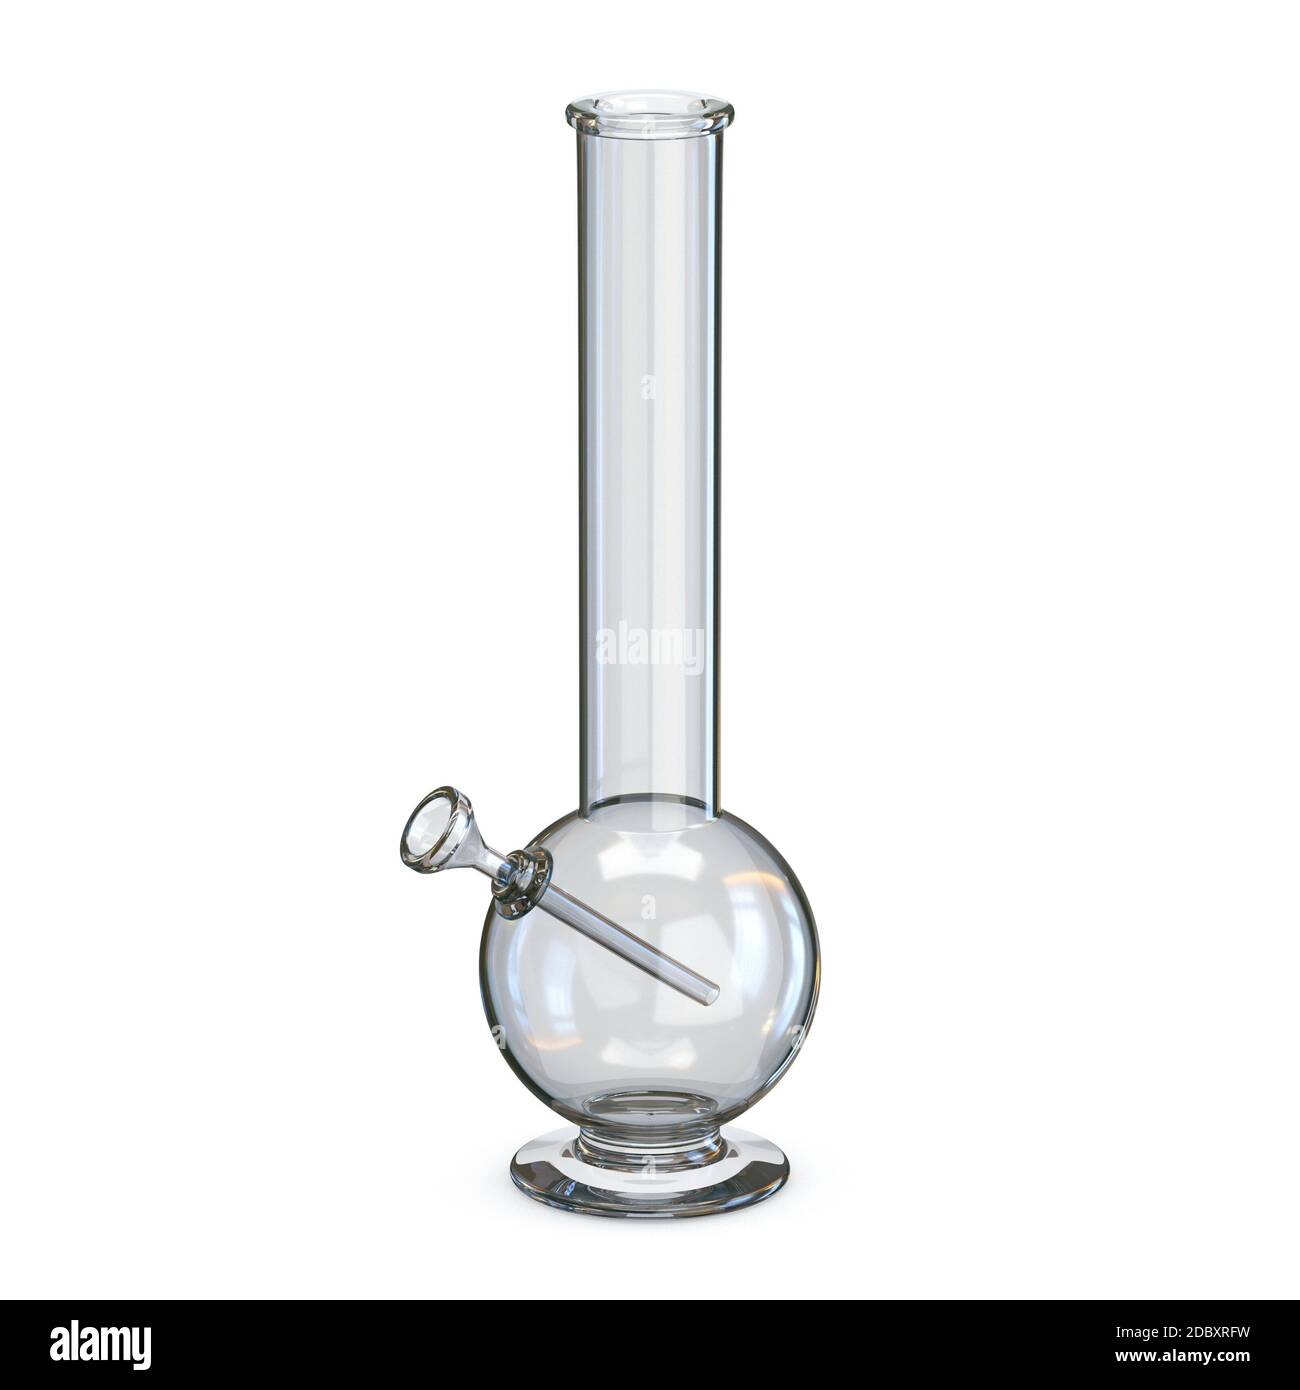 Simple transparent glass bong 3D render illustration isolated on white  background Stock Photo - Alamy